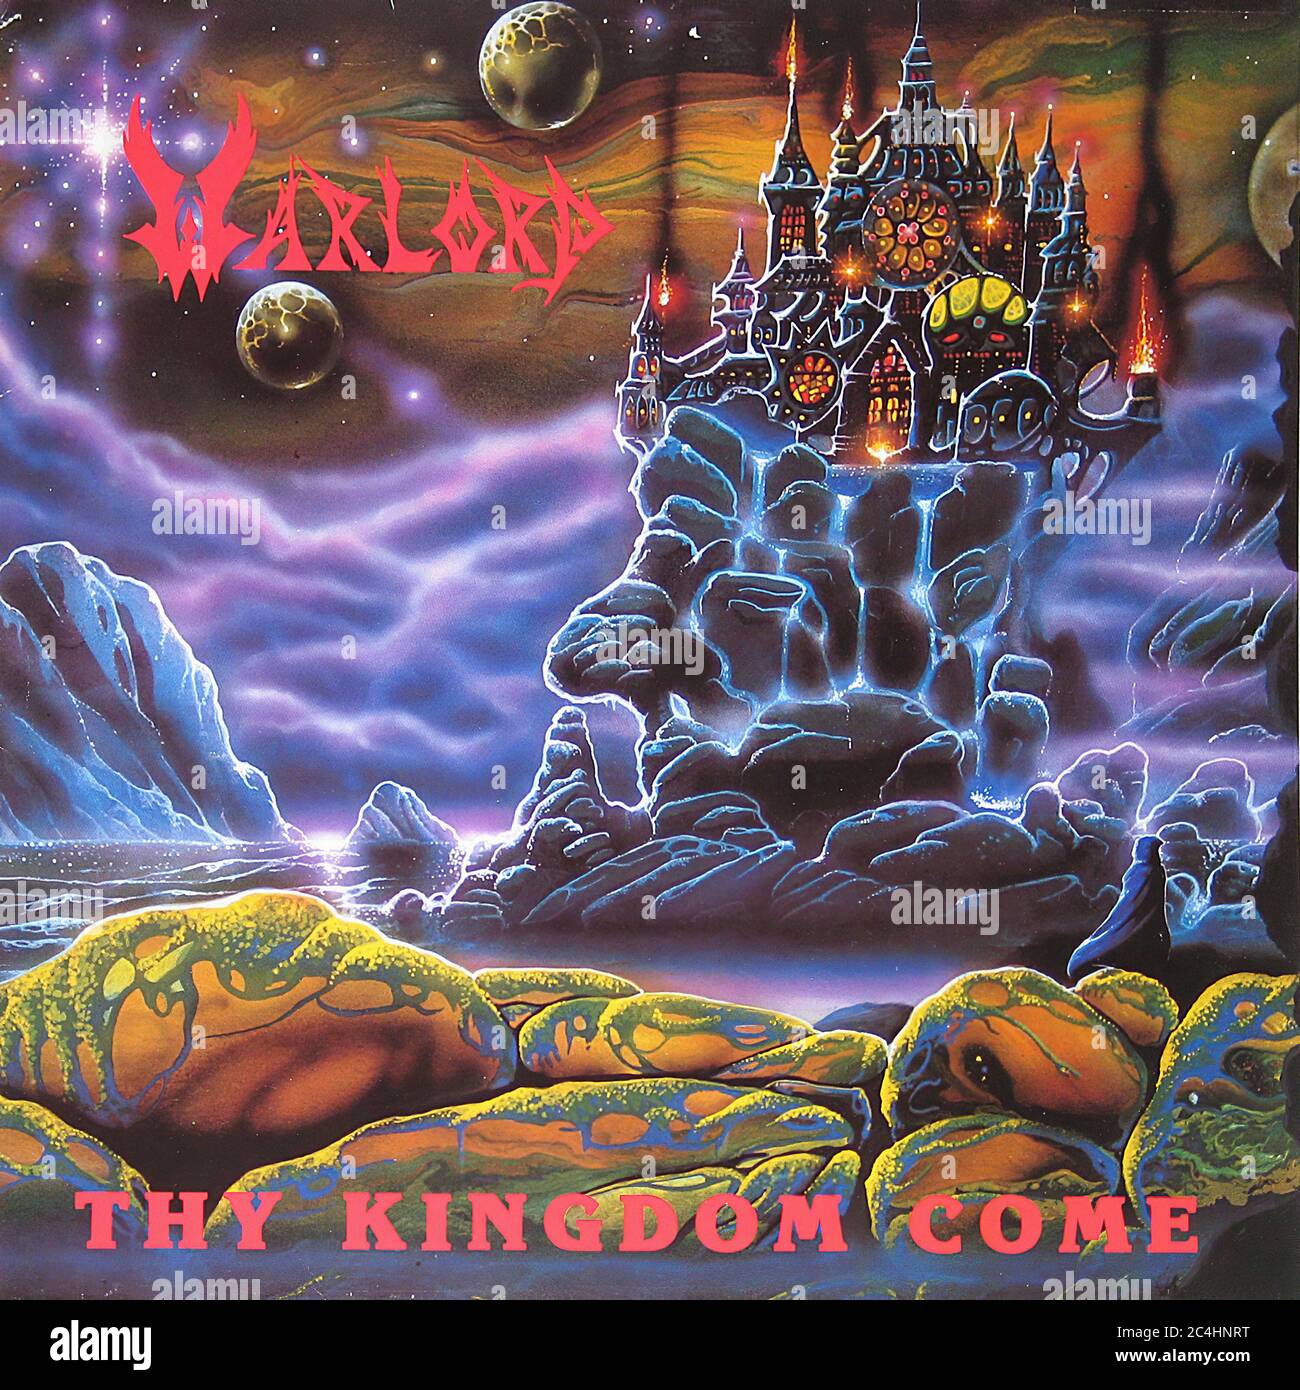 Warlord Thy Kingdom Come 12'' Vinyl Lp - Vintage Record Cover Stock Photo -  Alamy